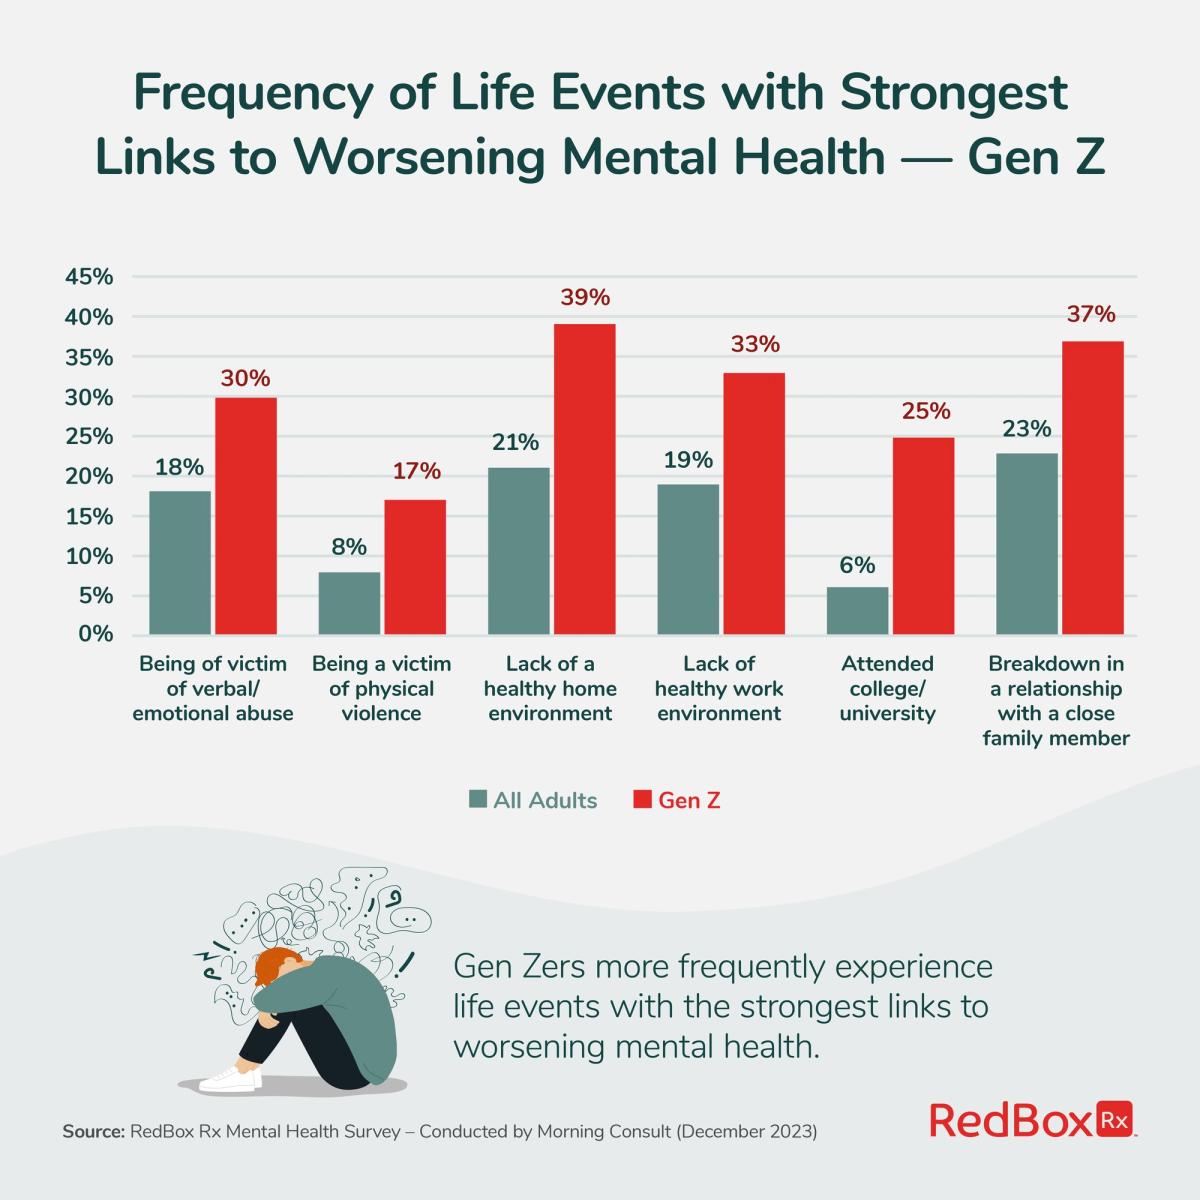 Gen Zers More Frequently Experience Life Events With the Strongest Links to Worsening Mental Health